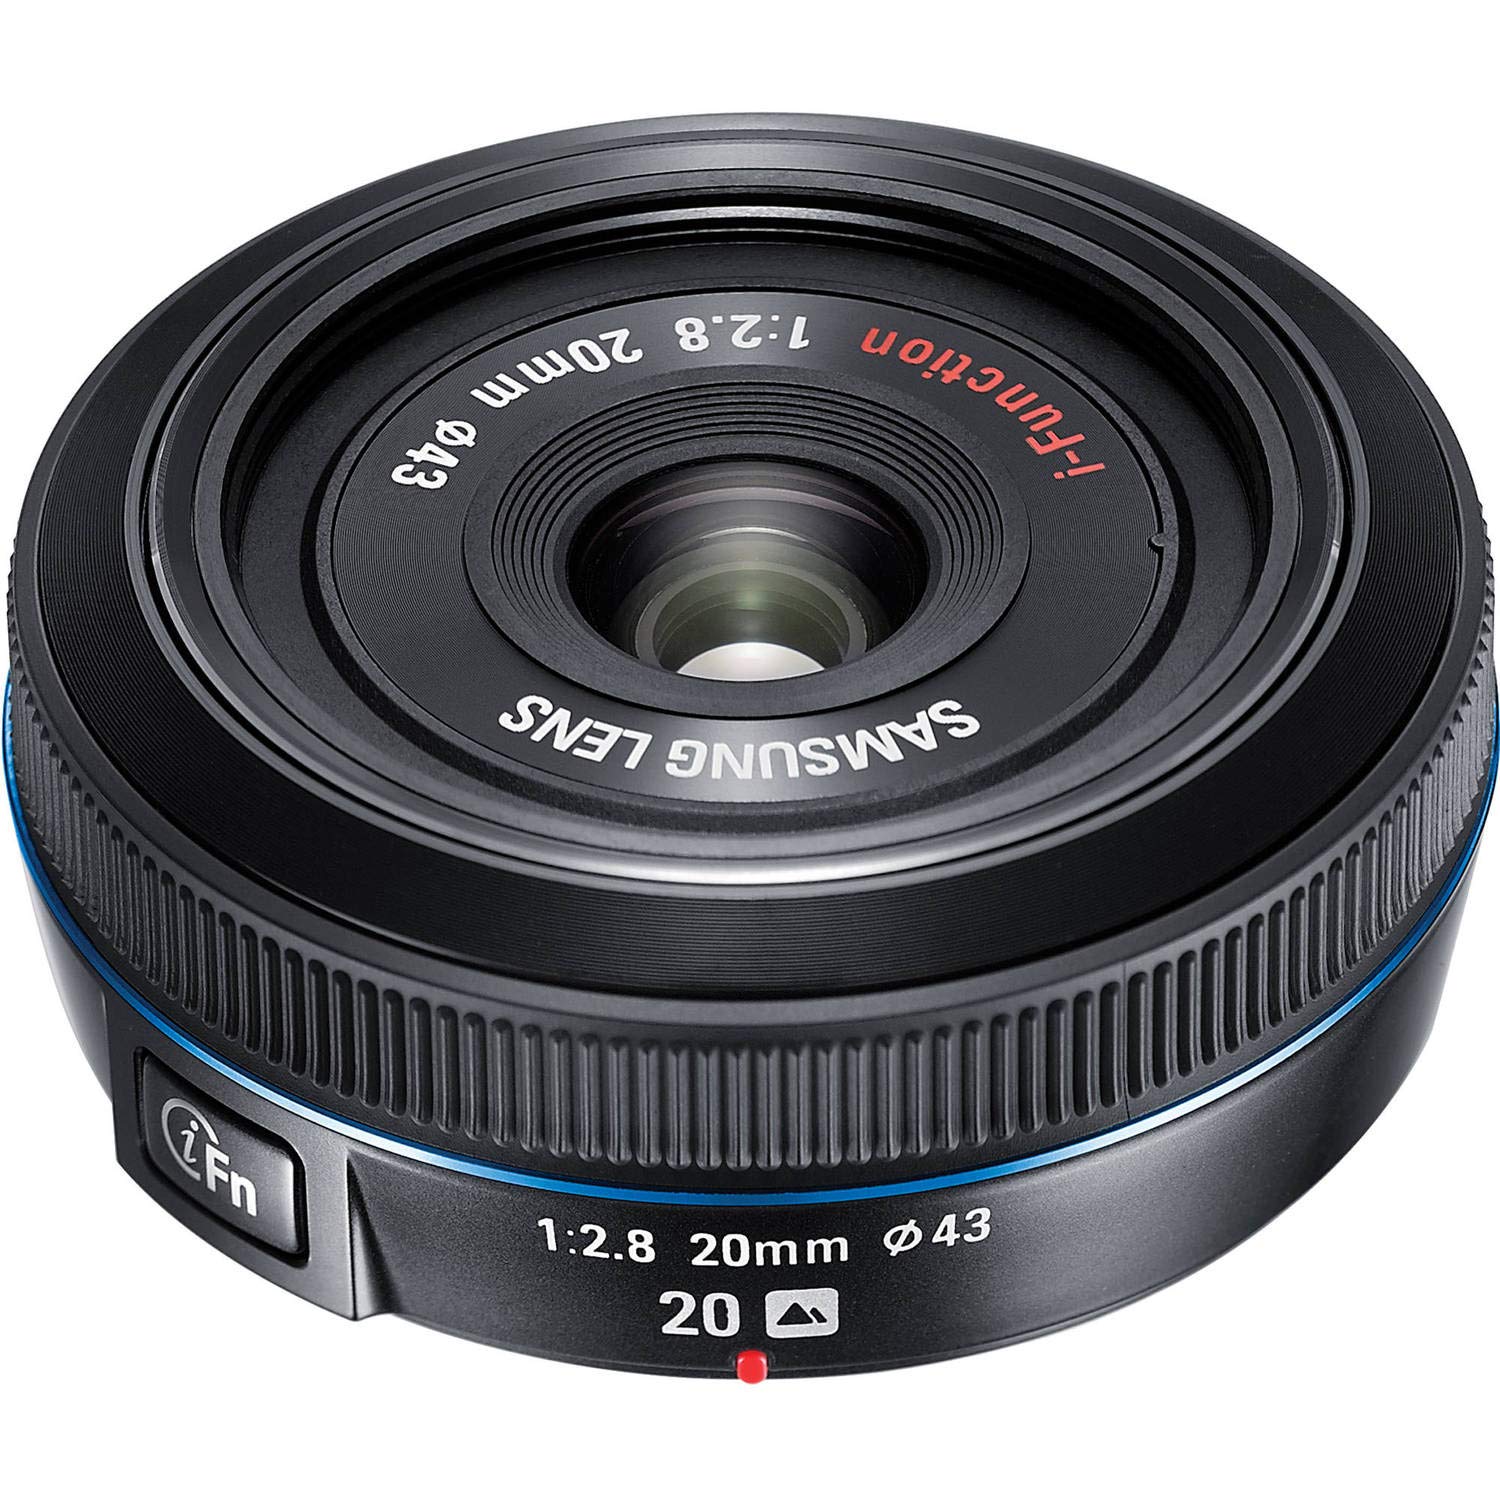 Samsung 20mm f/2.8 Pancake Lens for NX10 / NX100 (Black) with Pro Filter (Renewed) - Reconditioned